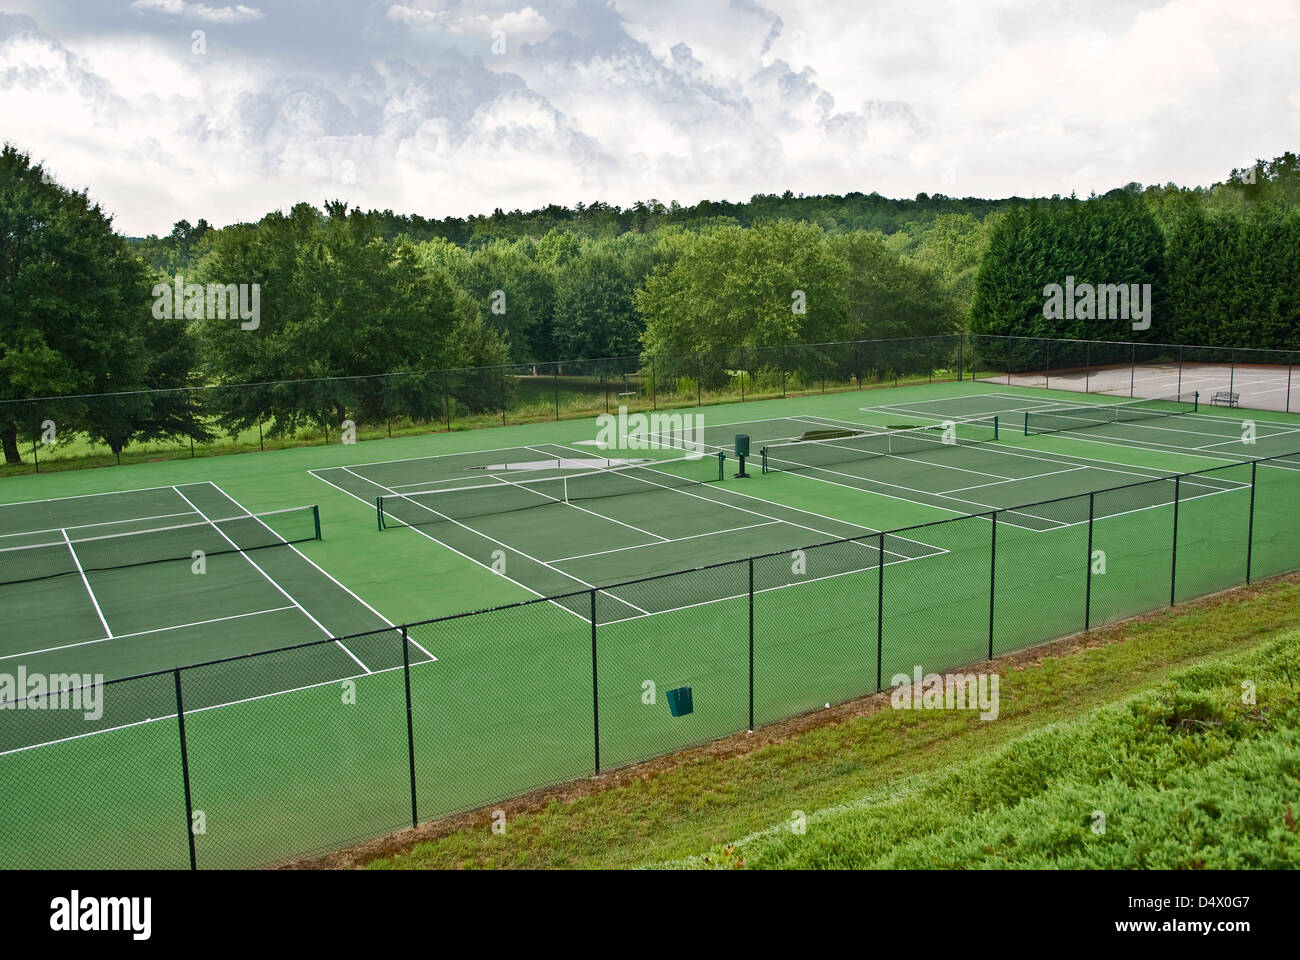 Tennis courts that have been abandoned because of rainy weather, there are puddles of water on some. Stock Photo